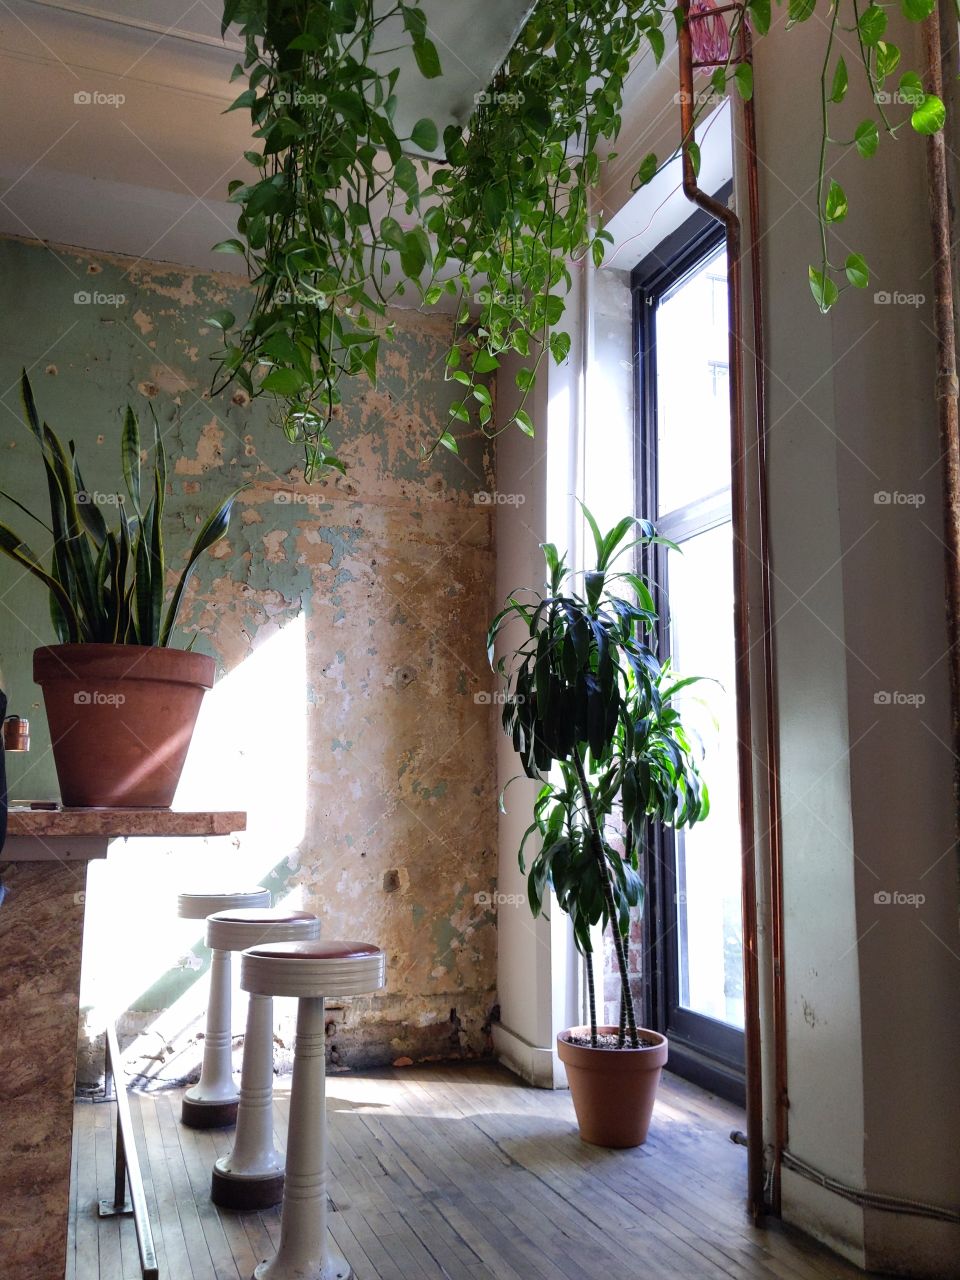 beautiful little corner of a restaurant with variations of light and shadows, and tons of green plants